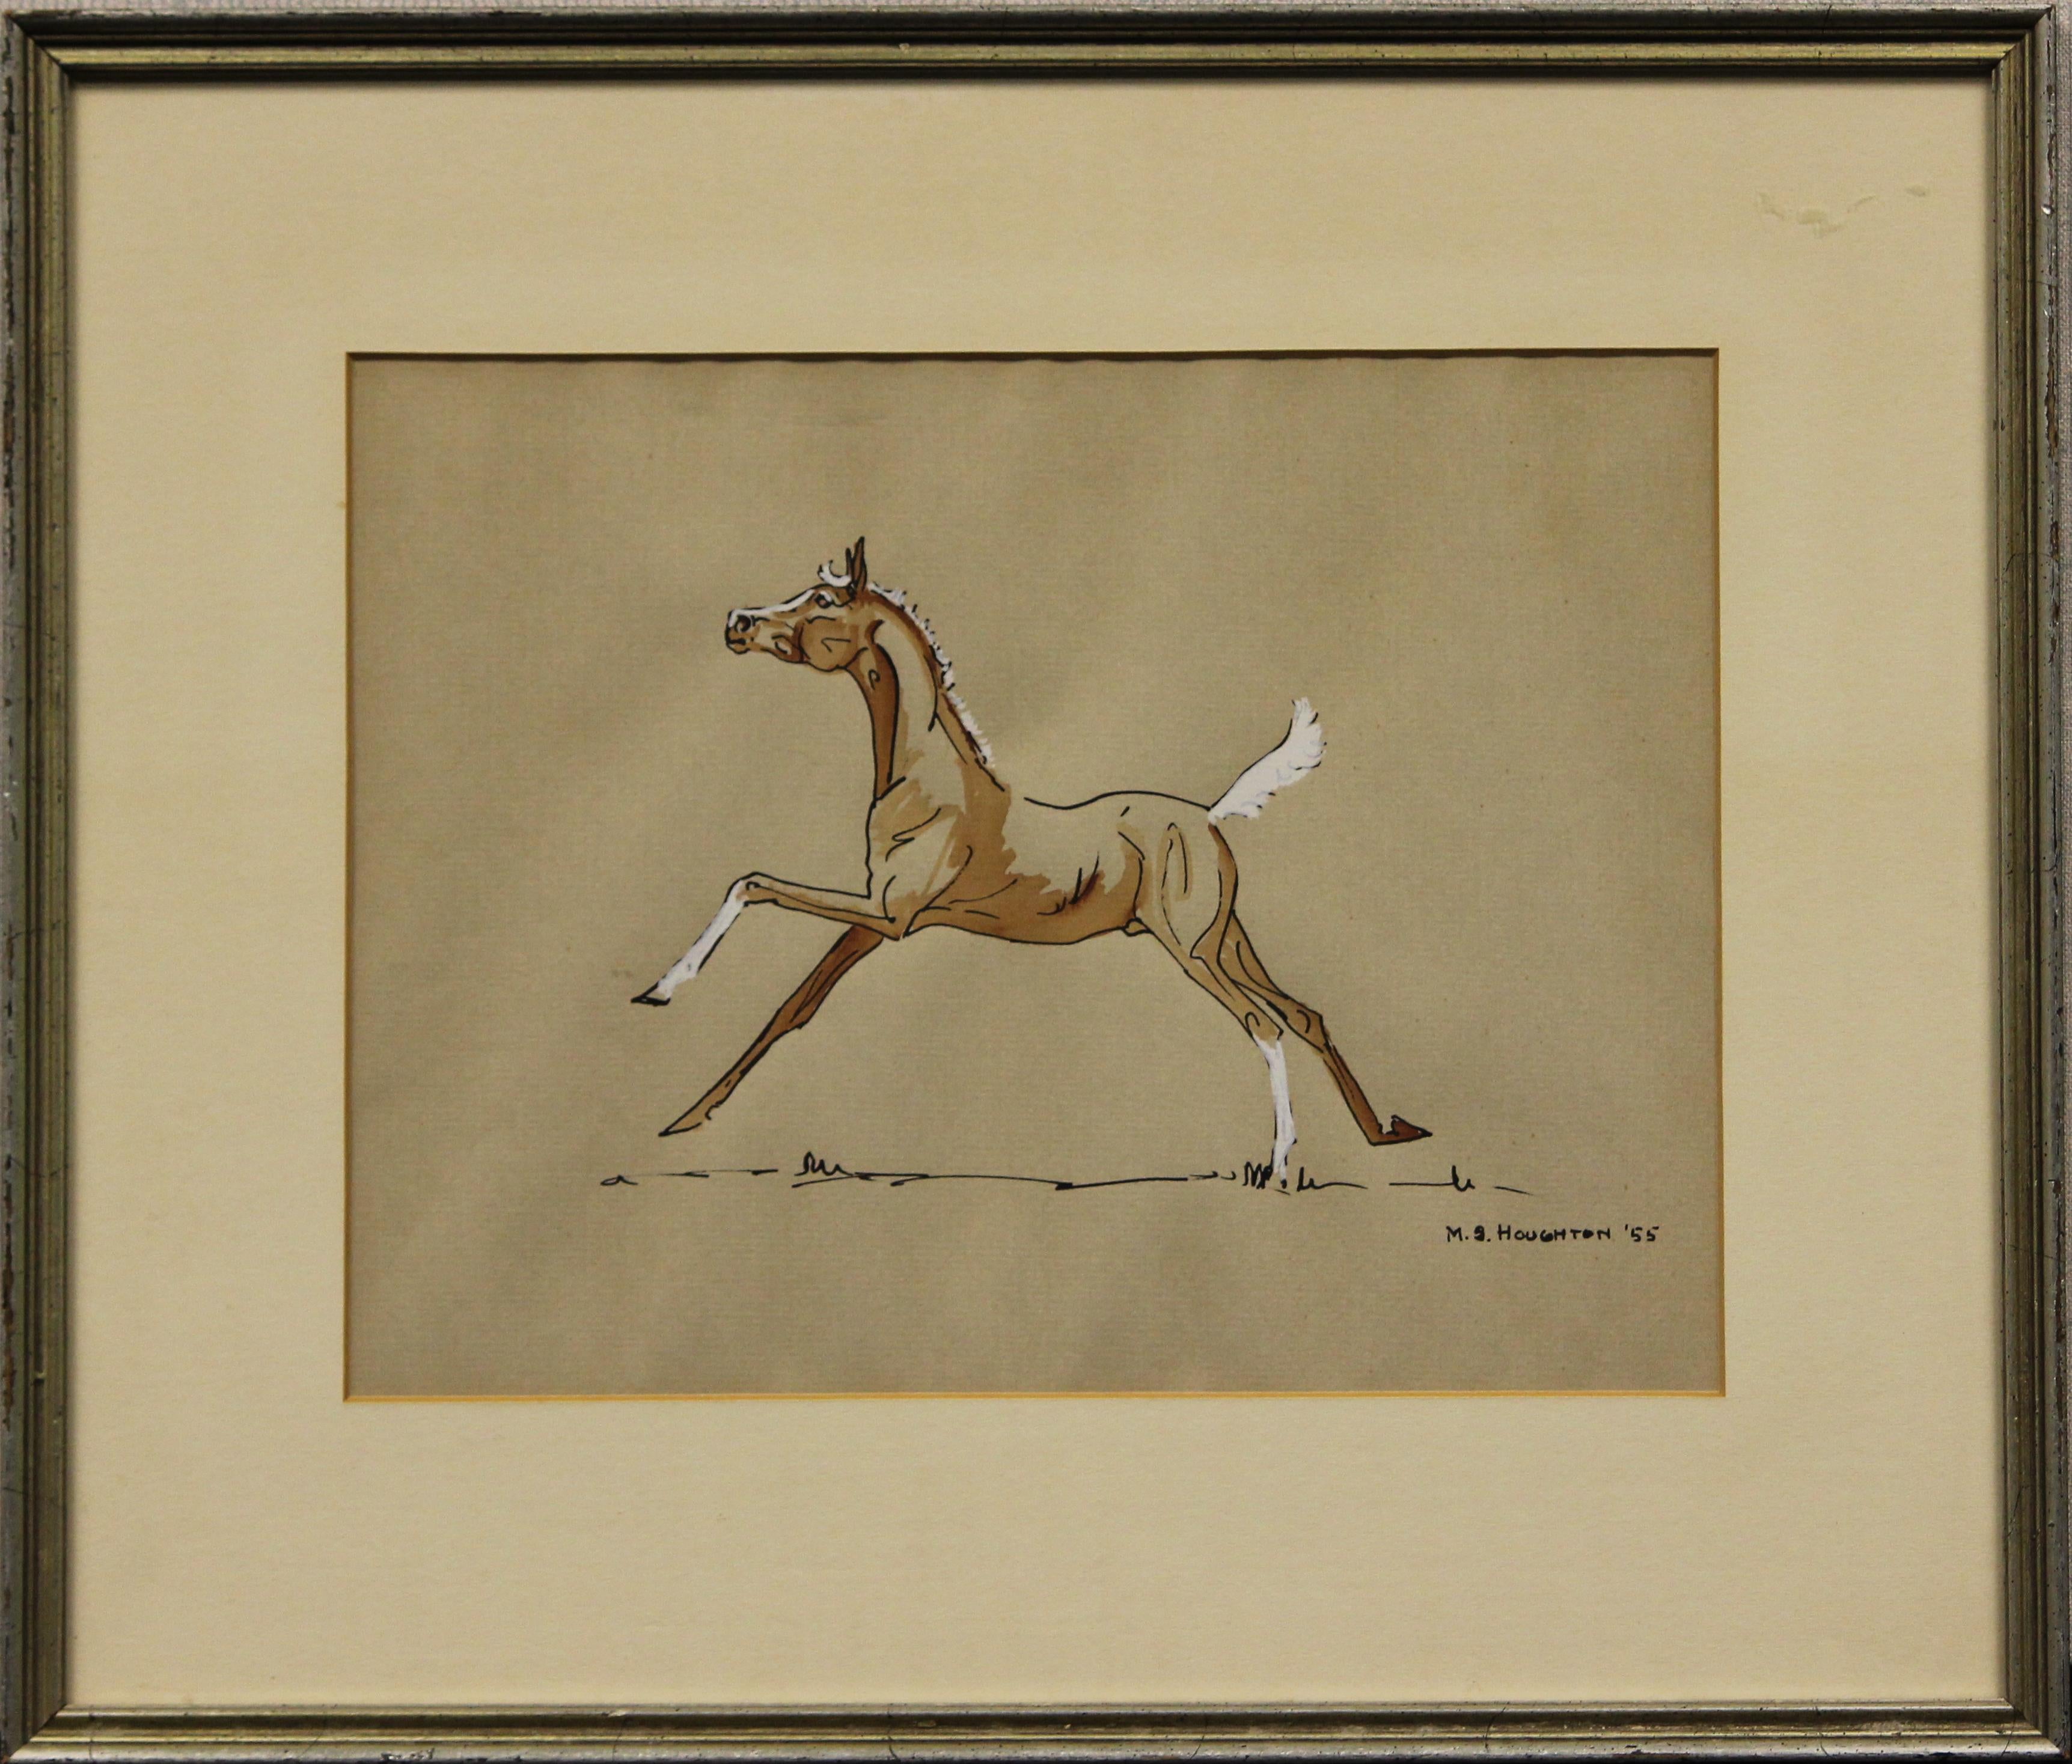 Playful Colt - Art by M.S. Houghton